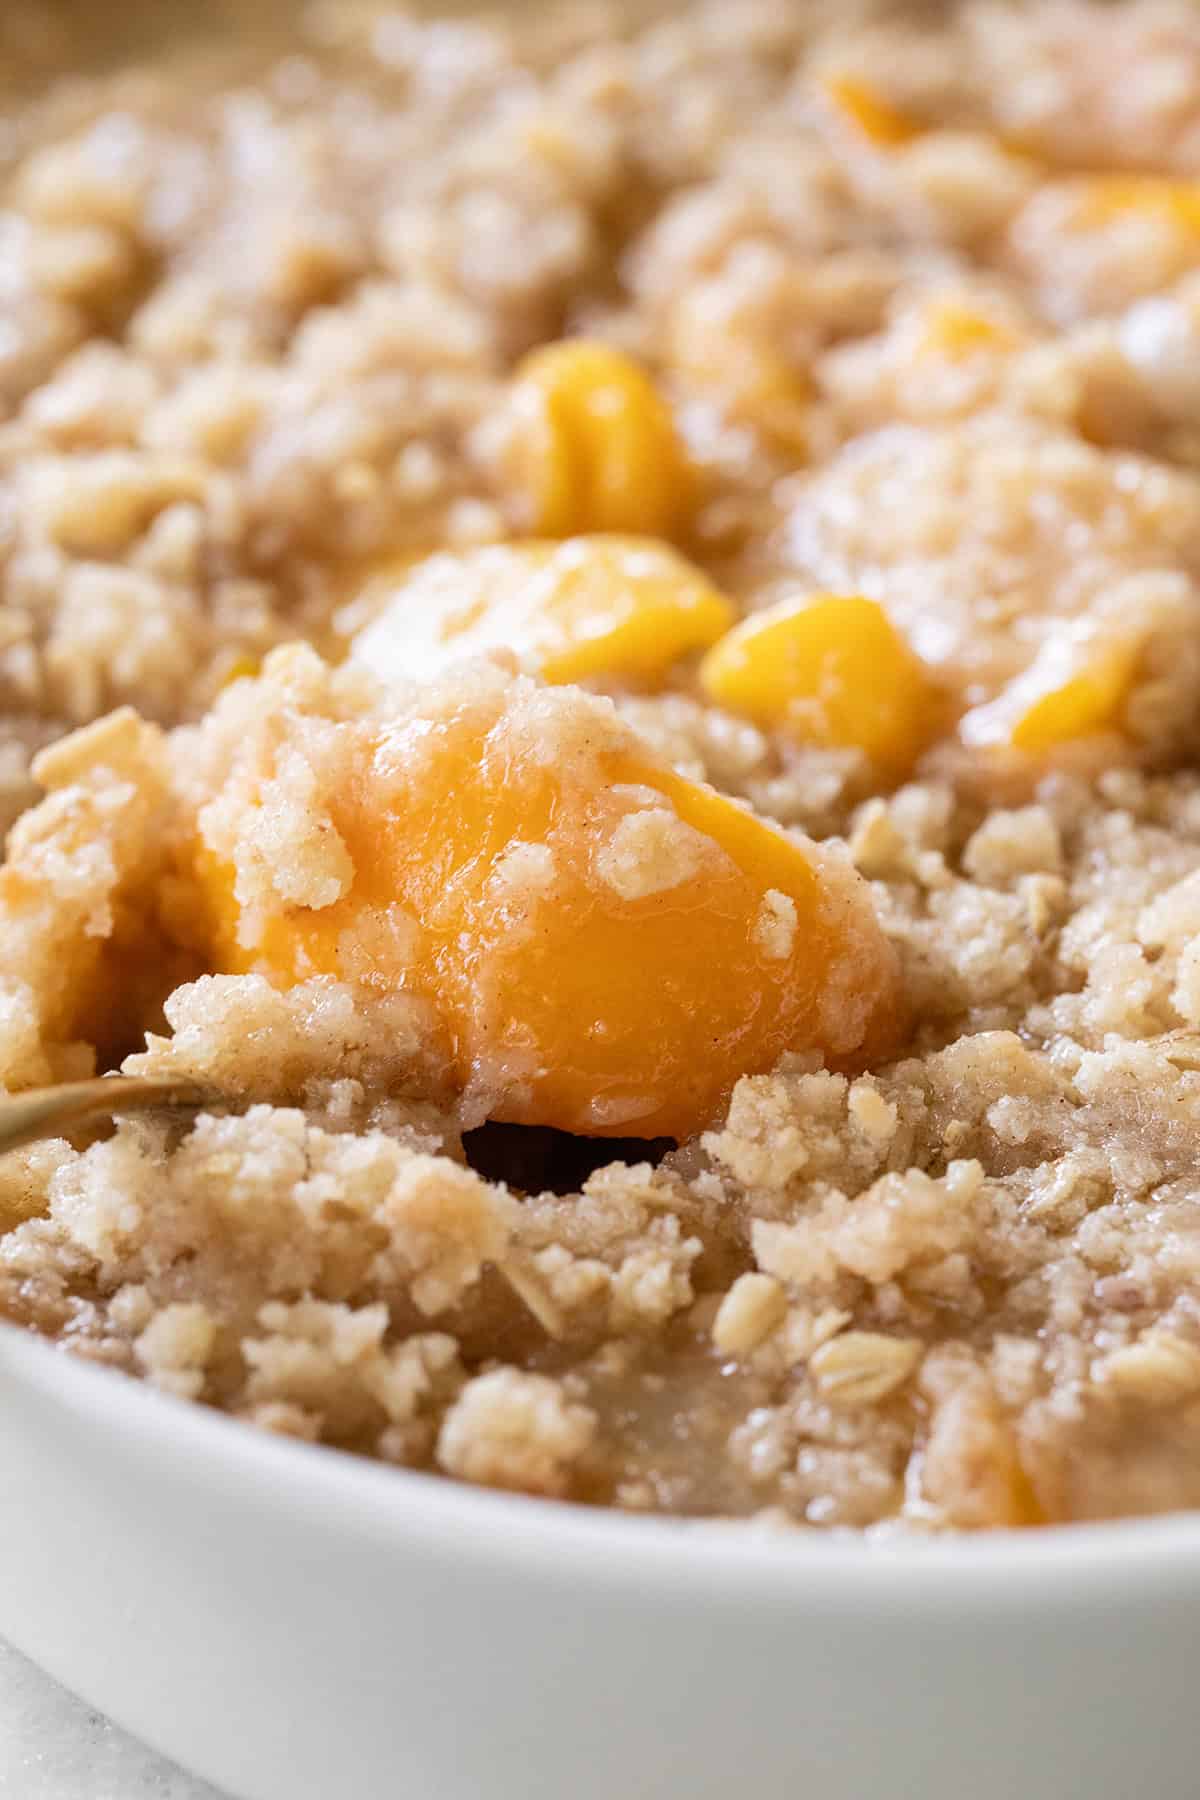 Peach crisp made with canned peaches.